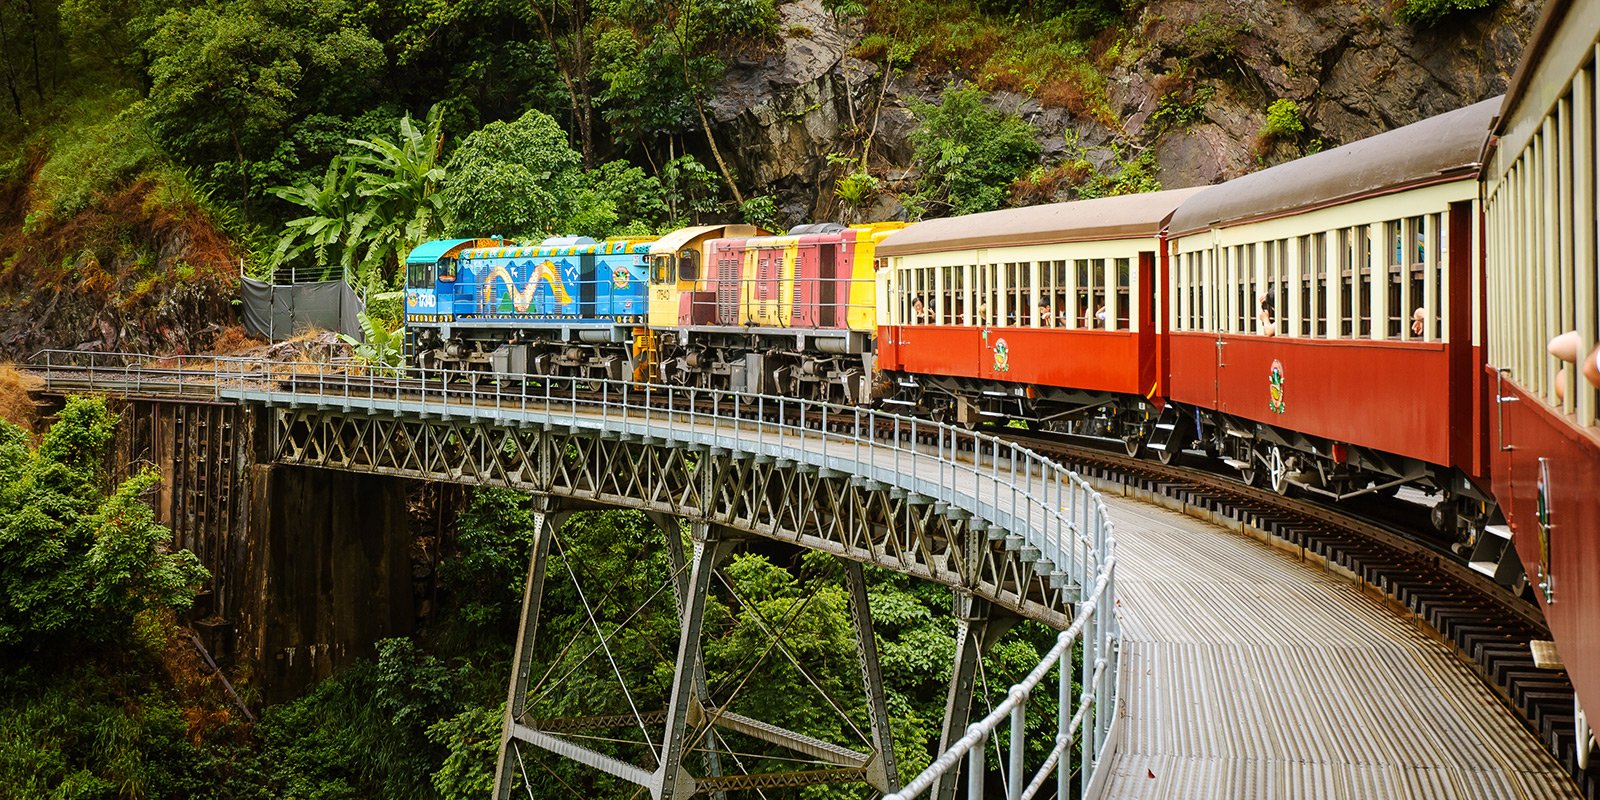 How to take a journey through the tropical forest on an old-fashioned train in Cairns